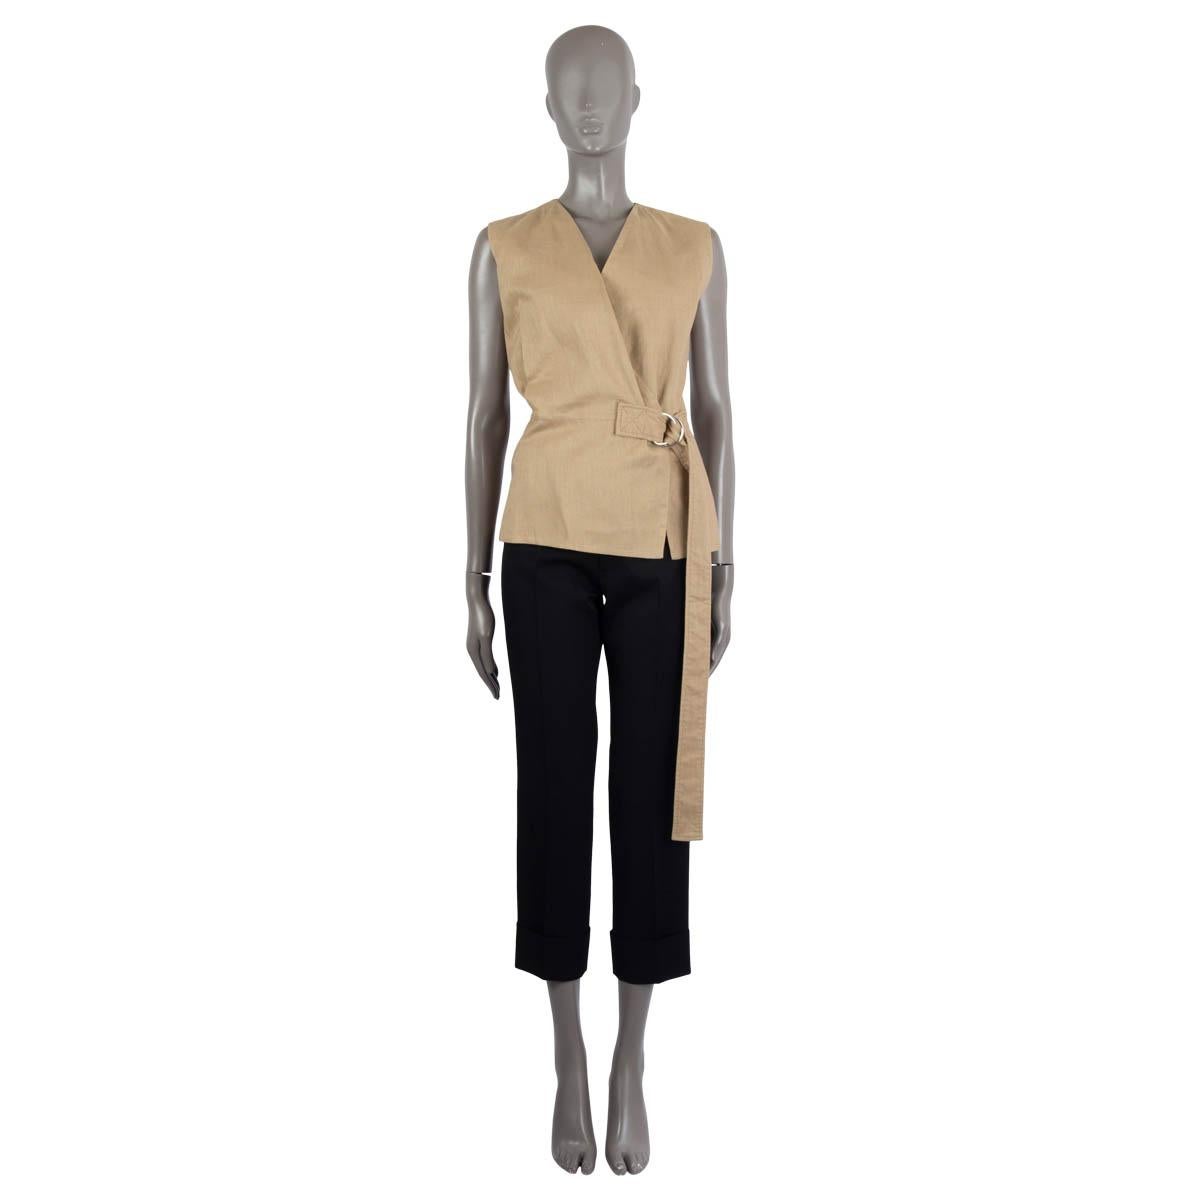 100% authentic Céline by Phoebe Philo wrap vest in beige linen (53%) and cotton (47%) featuring high-waist belt and silver-tone metal buckle at front and backside. Has been worn and is in excellent condition. 

2014 Resort

Measurements
Tag